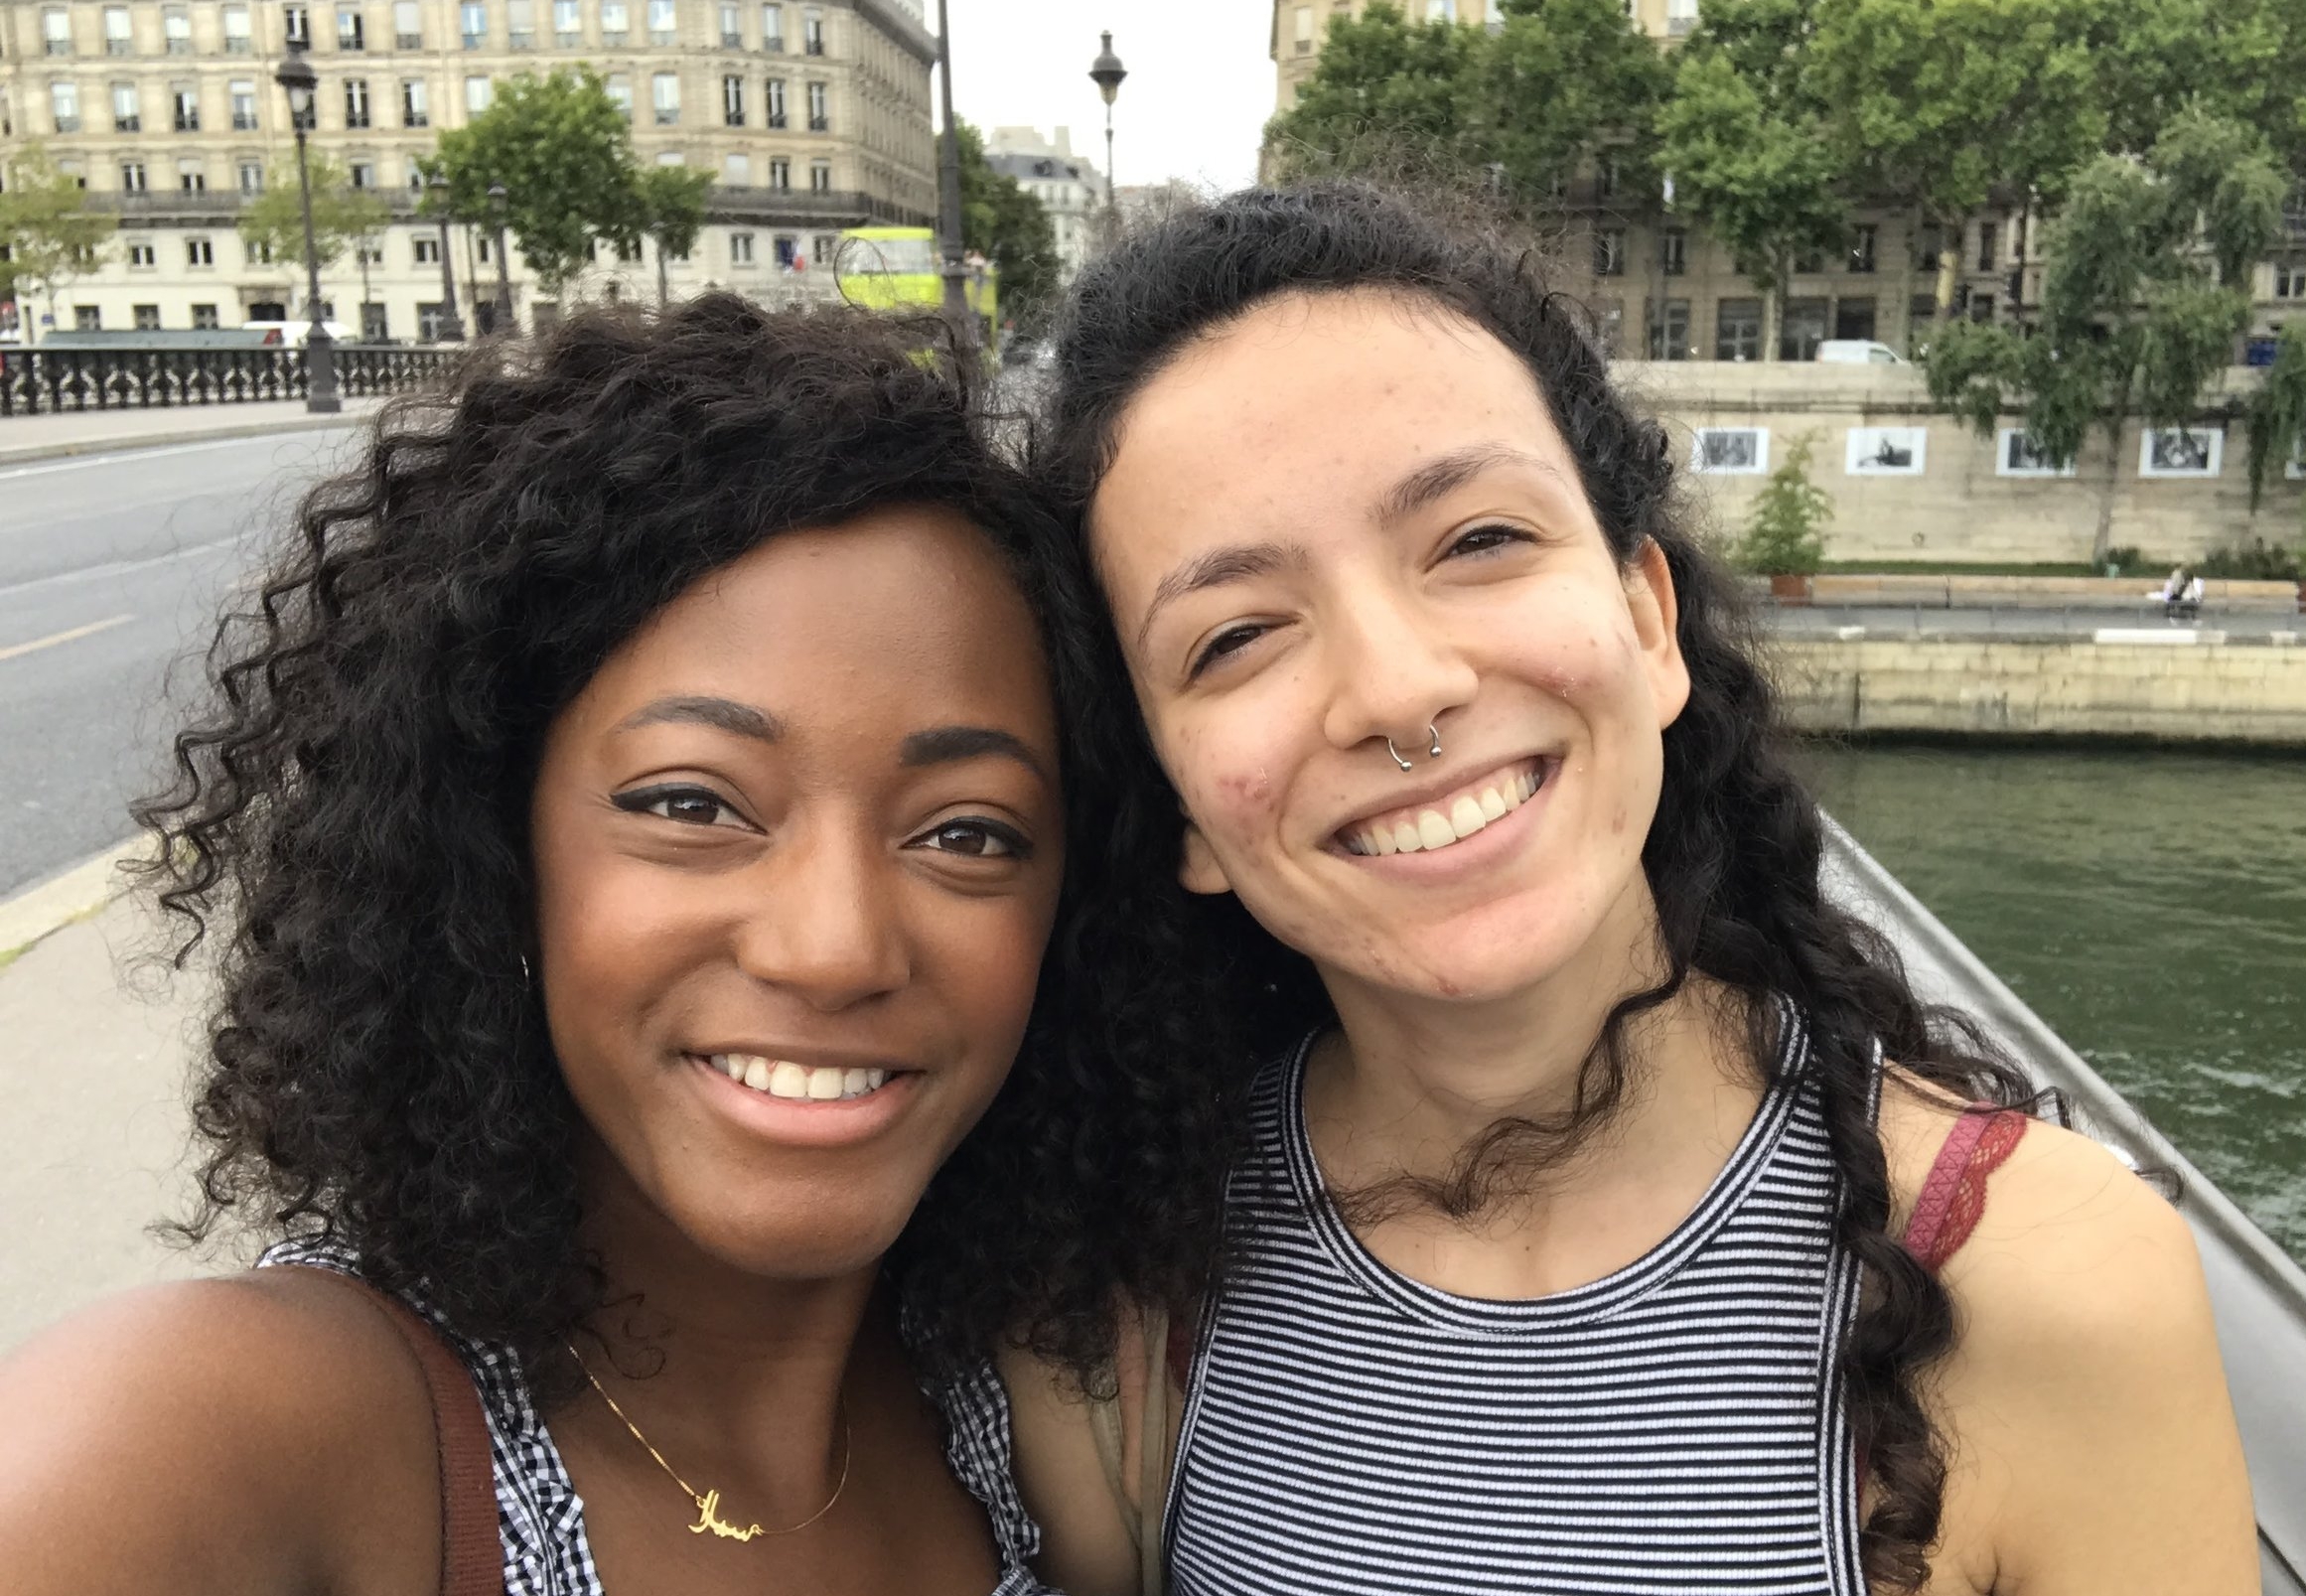 This Angel hosted me in Paris! The cool thing about Couch-surfing is that you've got a built-in local guide!